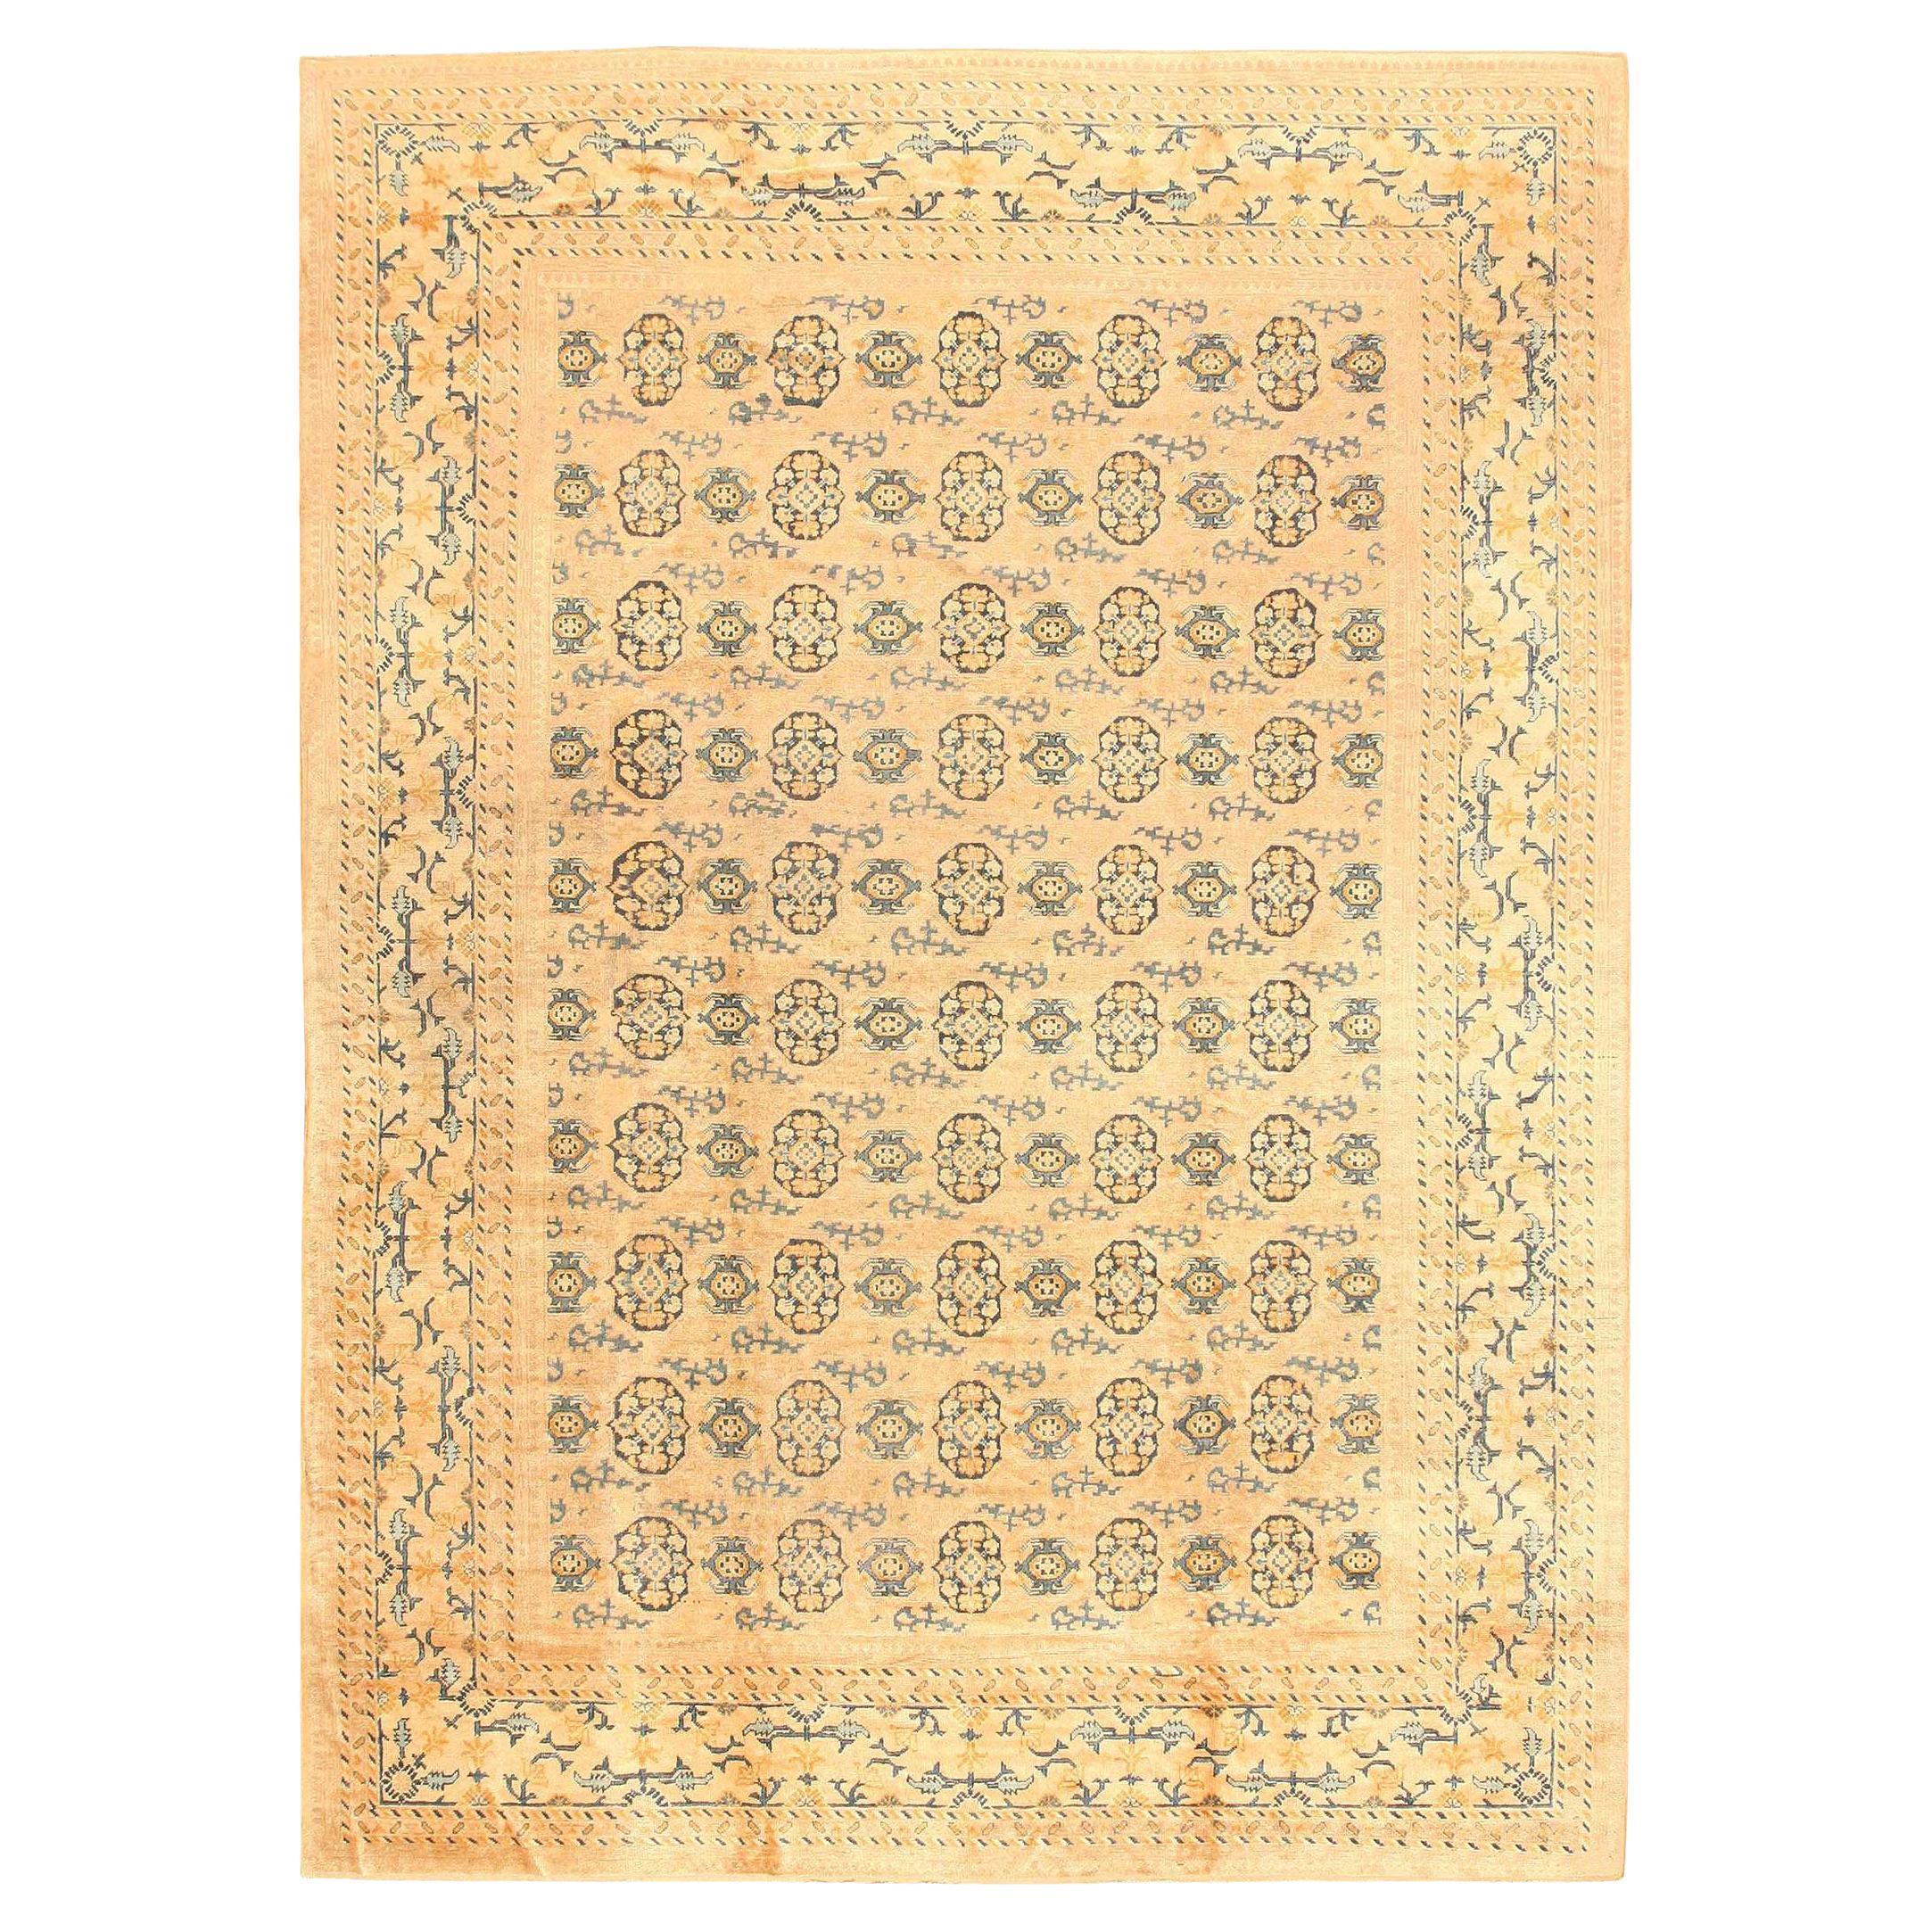 Rare and Extremely Decorative Antique Room Size Khotan Rug 9'5" x 13'1" For Sale